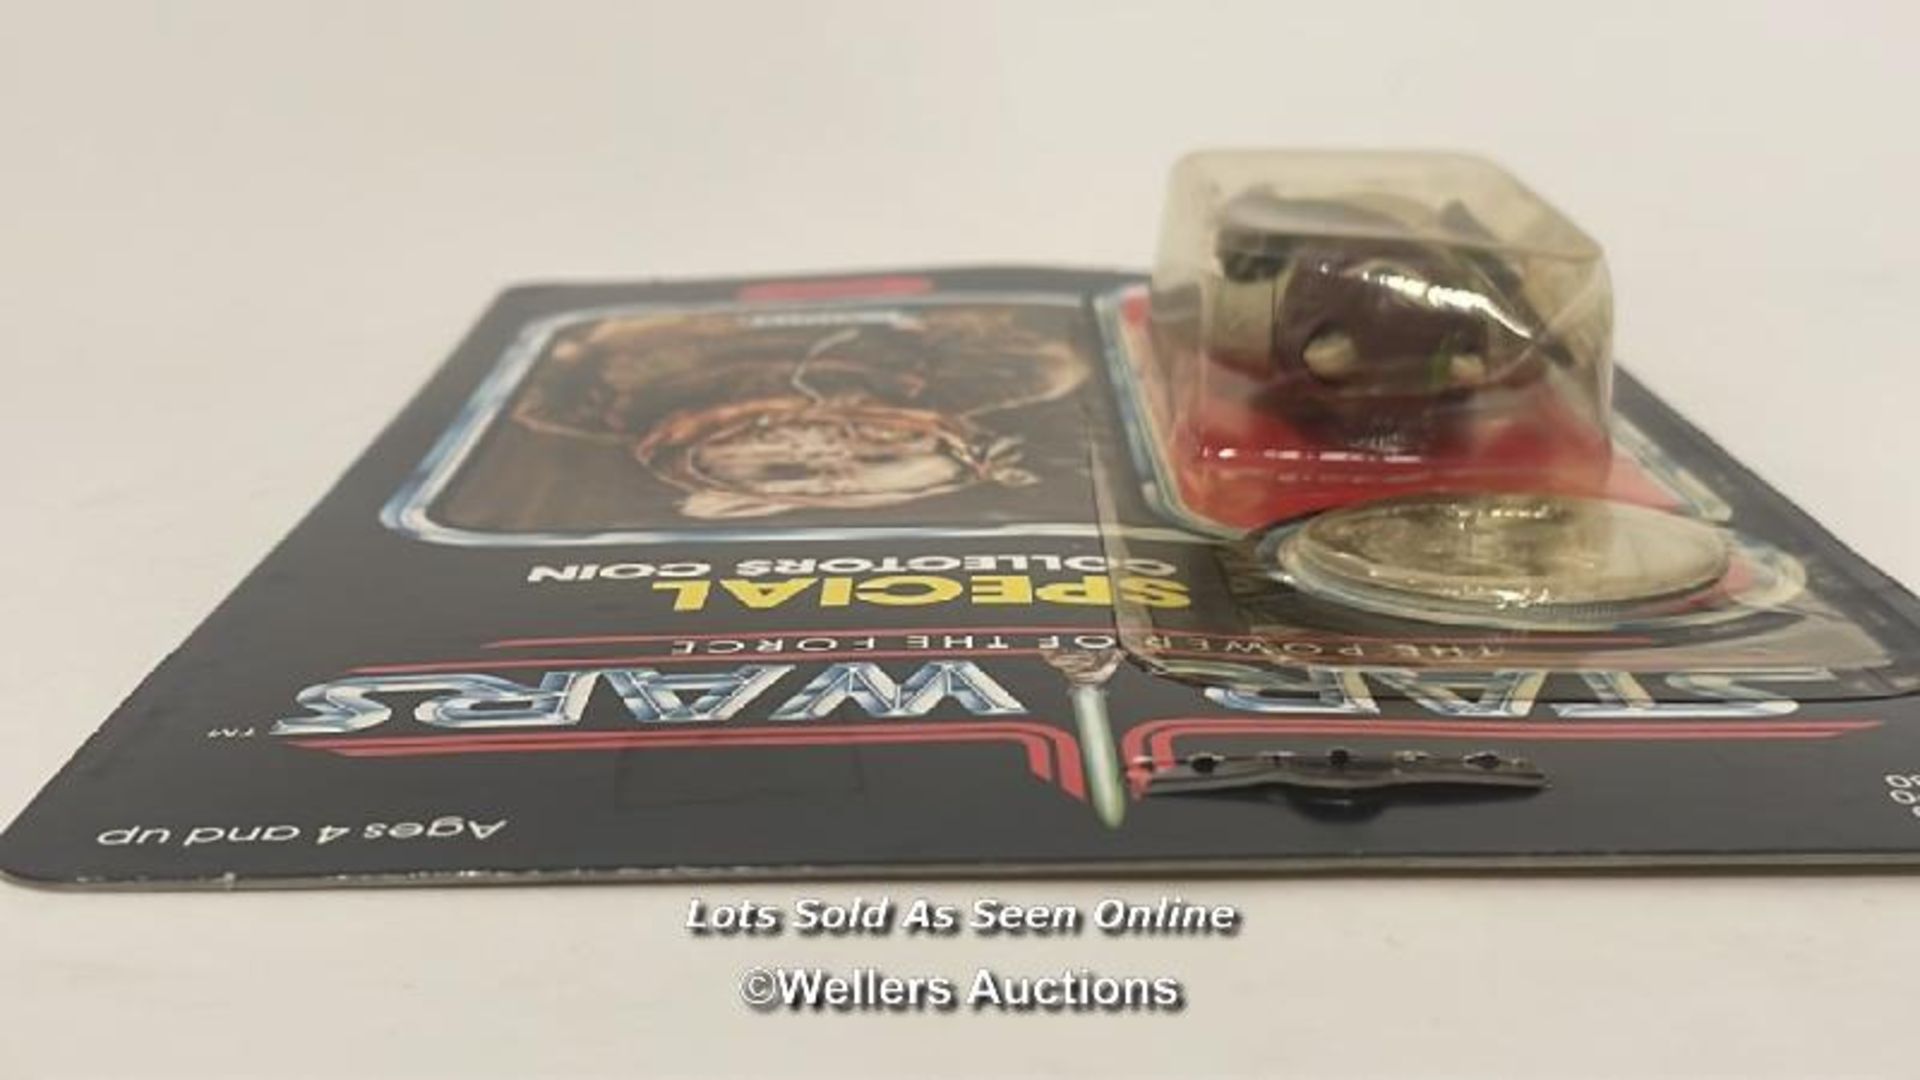 Star Wars vintage Warok 3 3/4" figure, Power of the Force 92 back with collectors coin, Kenner 1984, - Image 8 of 10